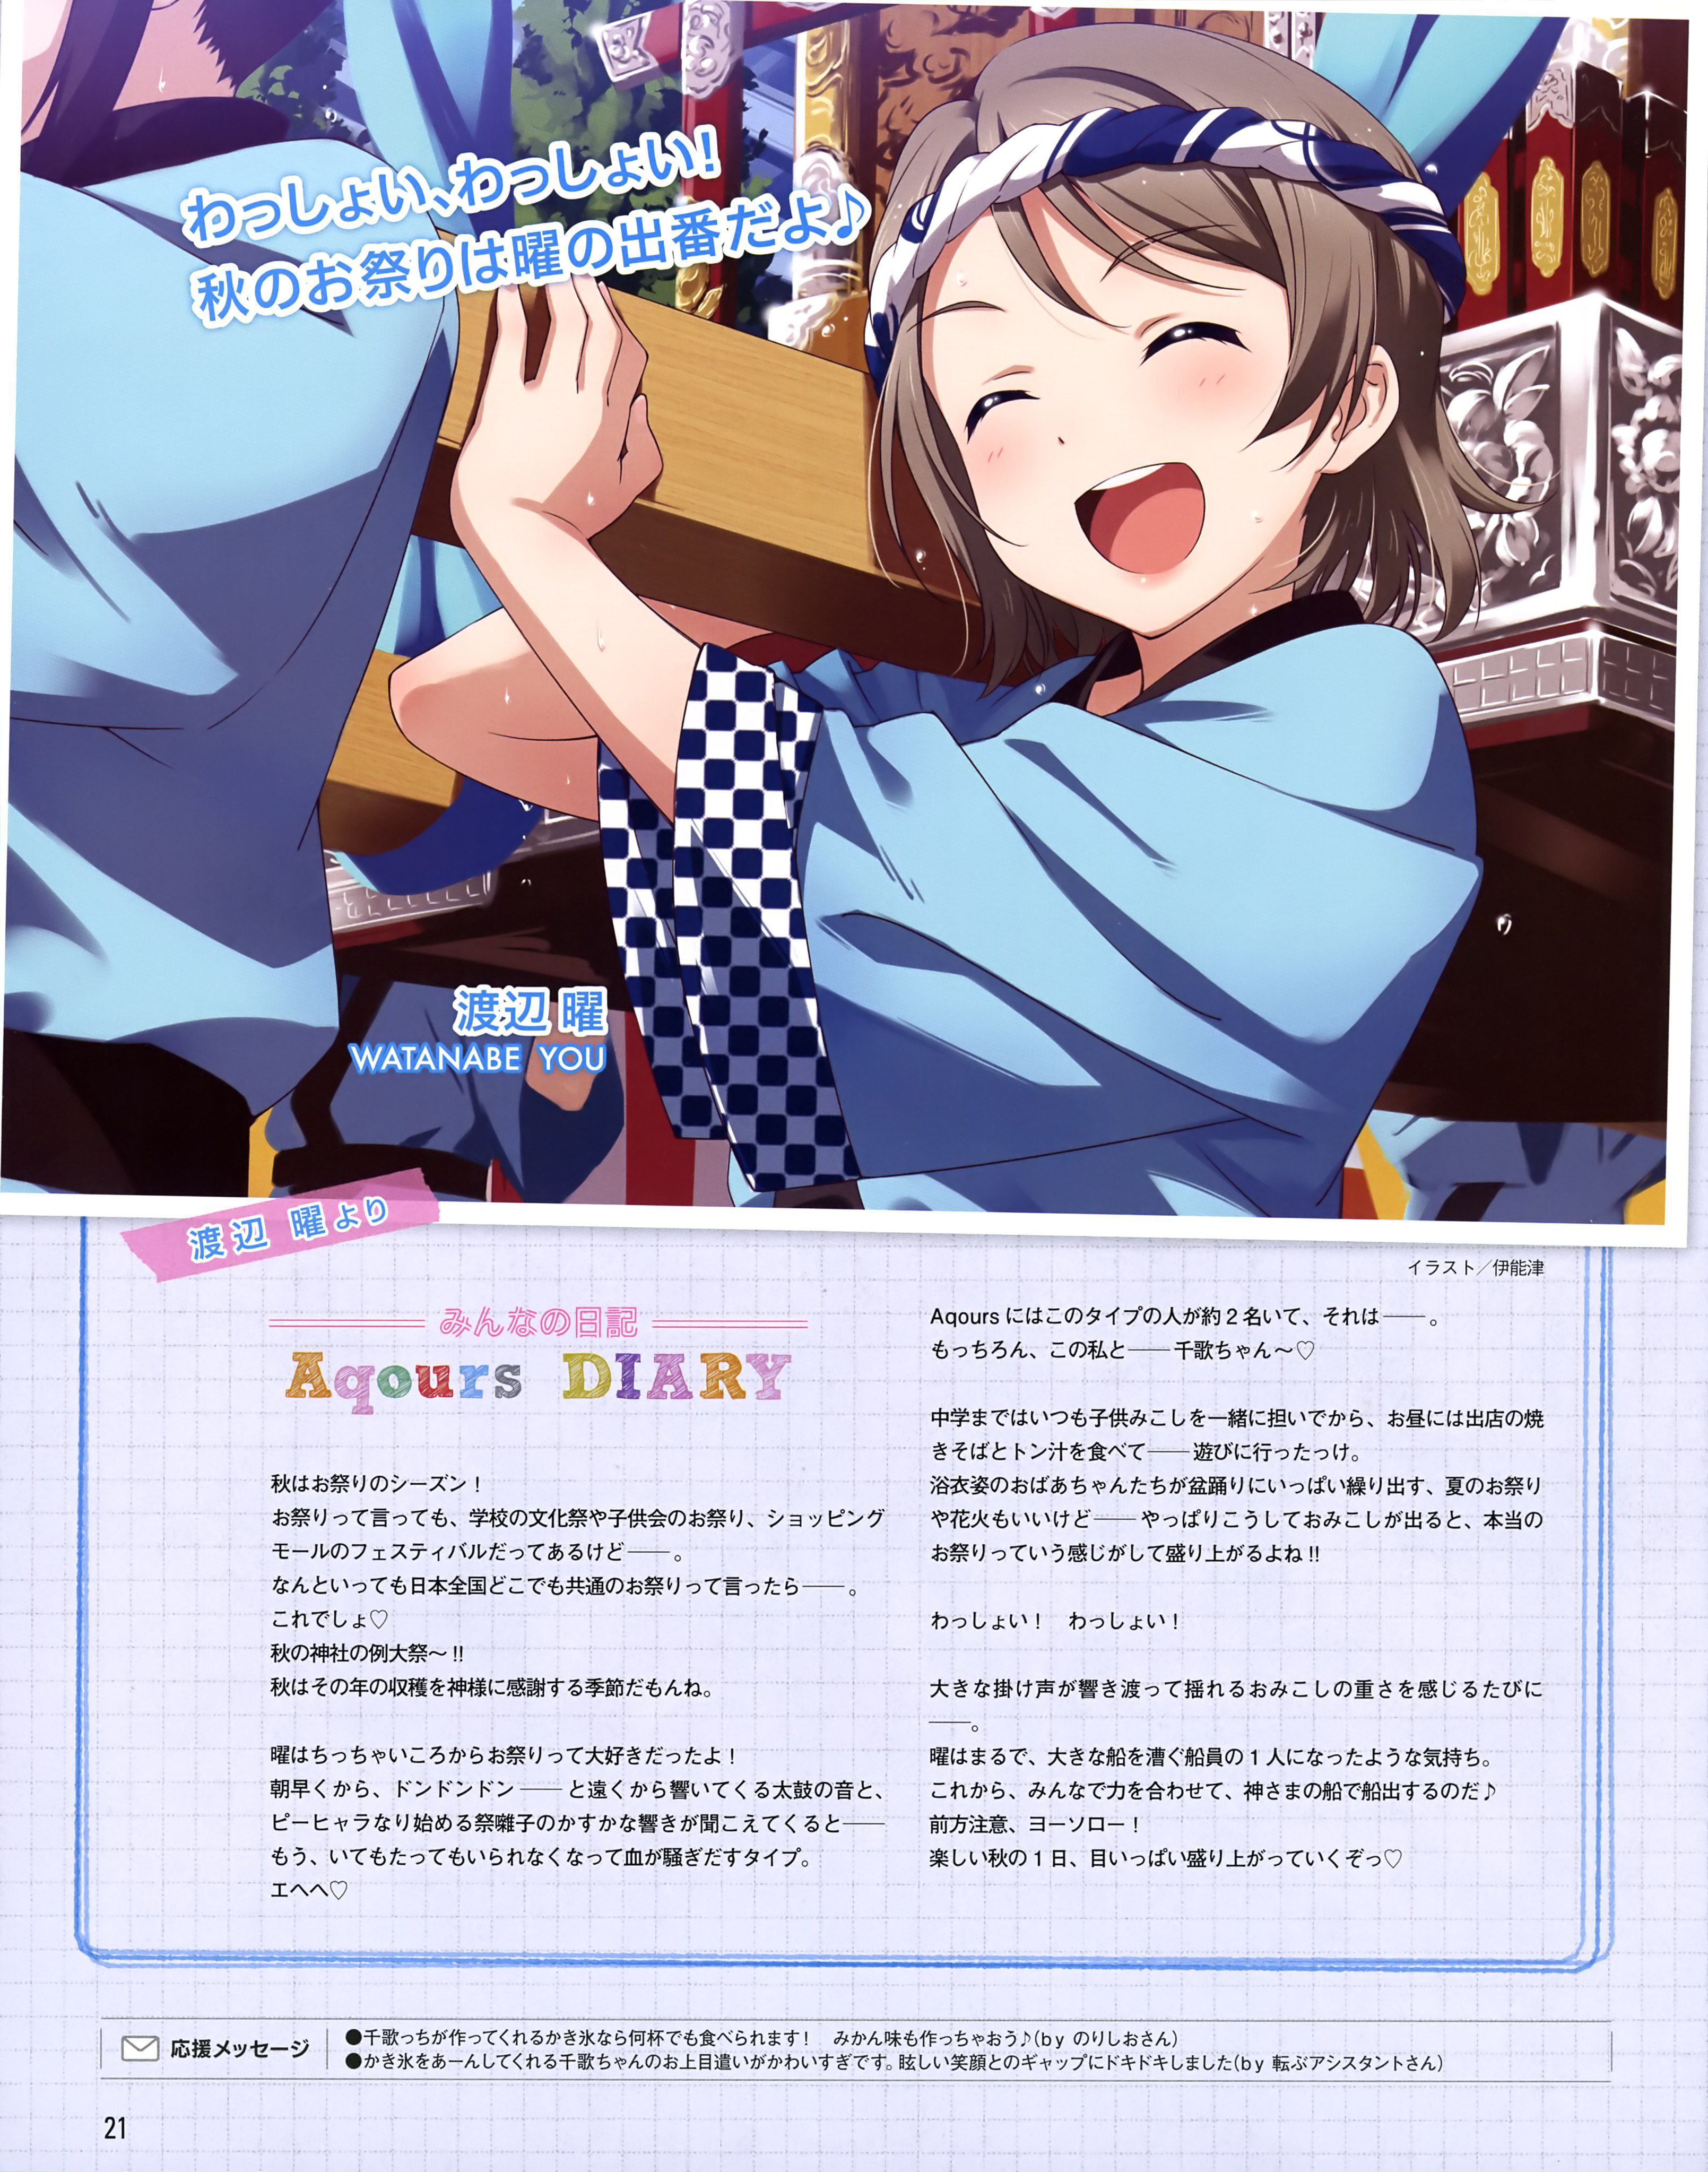 Love Live, Sunshine! Watanabe, Ken (Watanabe) Erotic pictures and Moe image Part 7 5